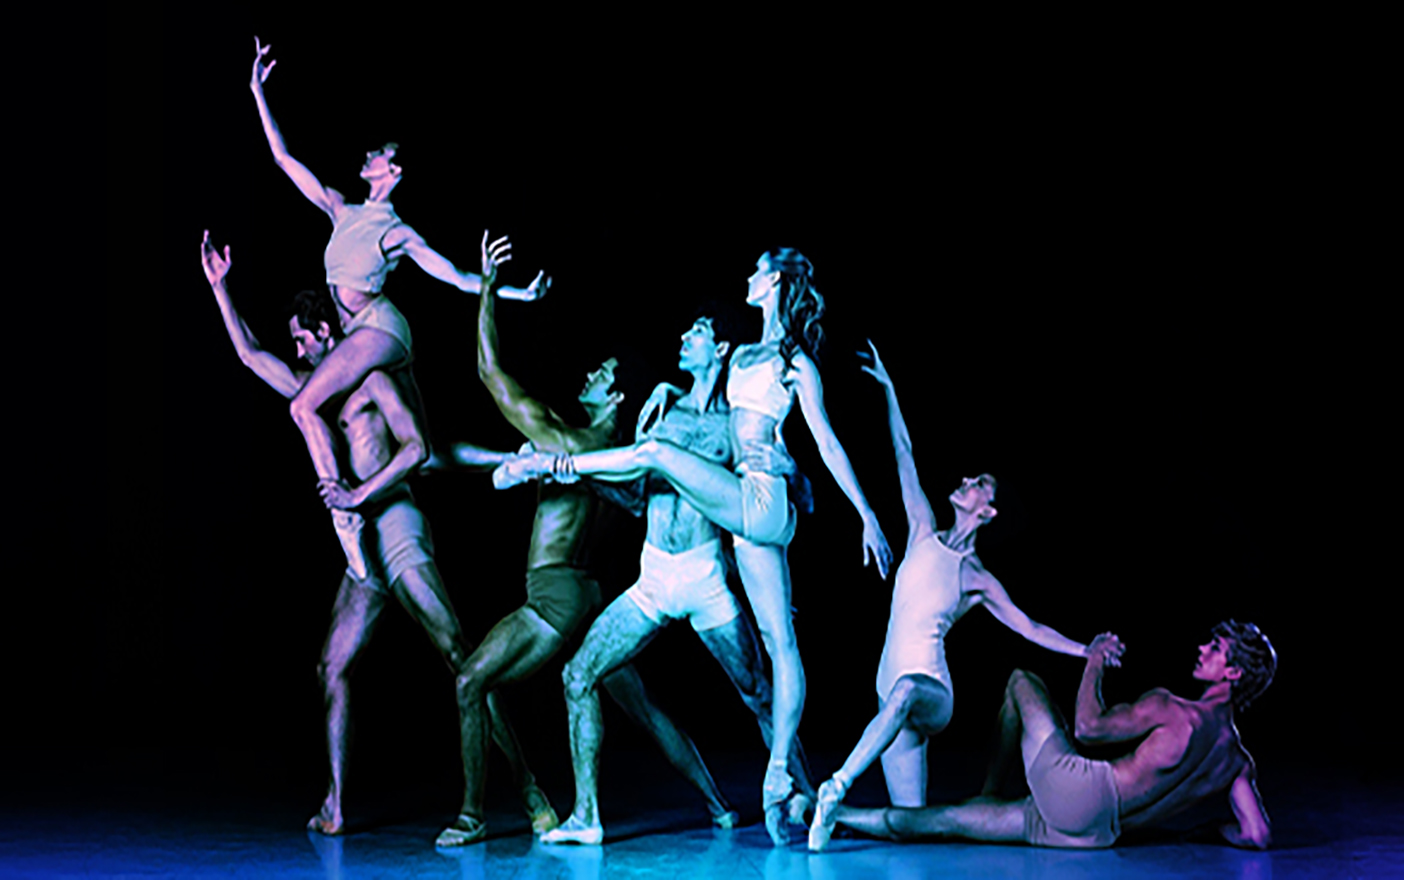 Miami City Ballet dancers on stage.